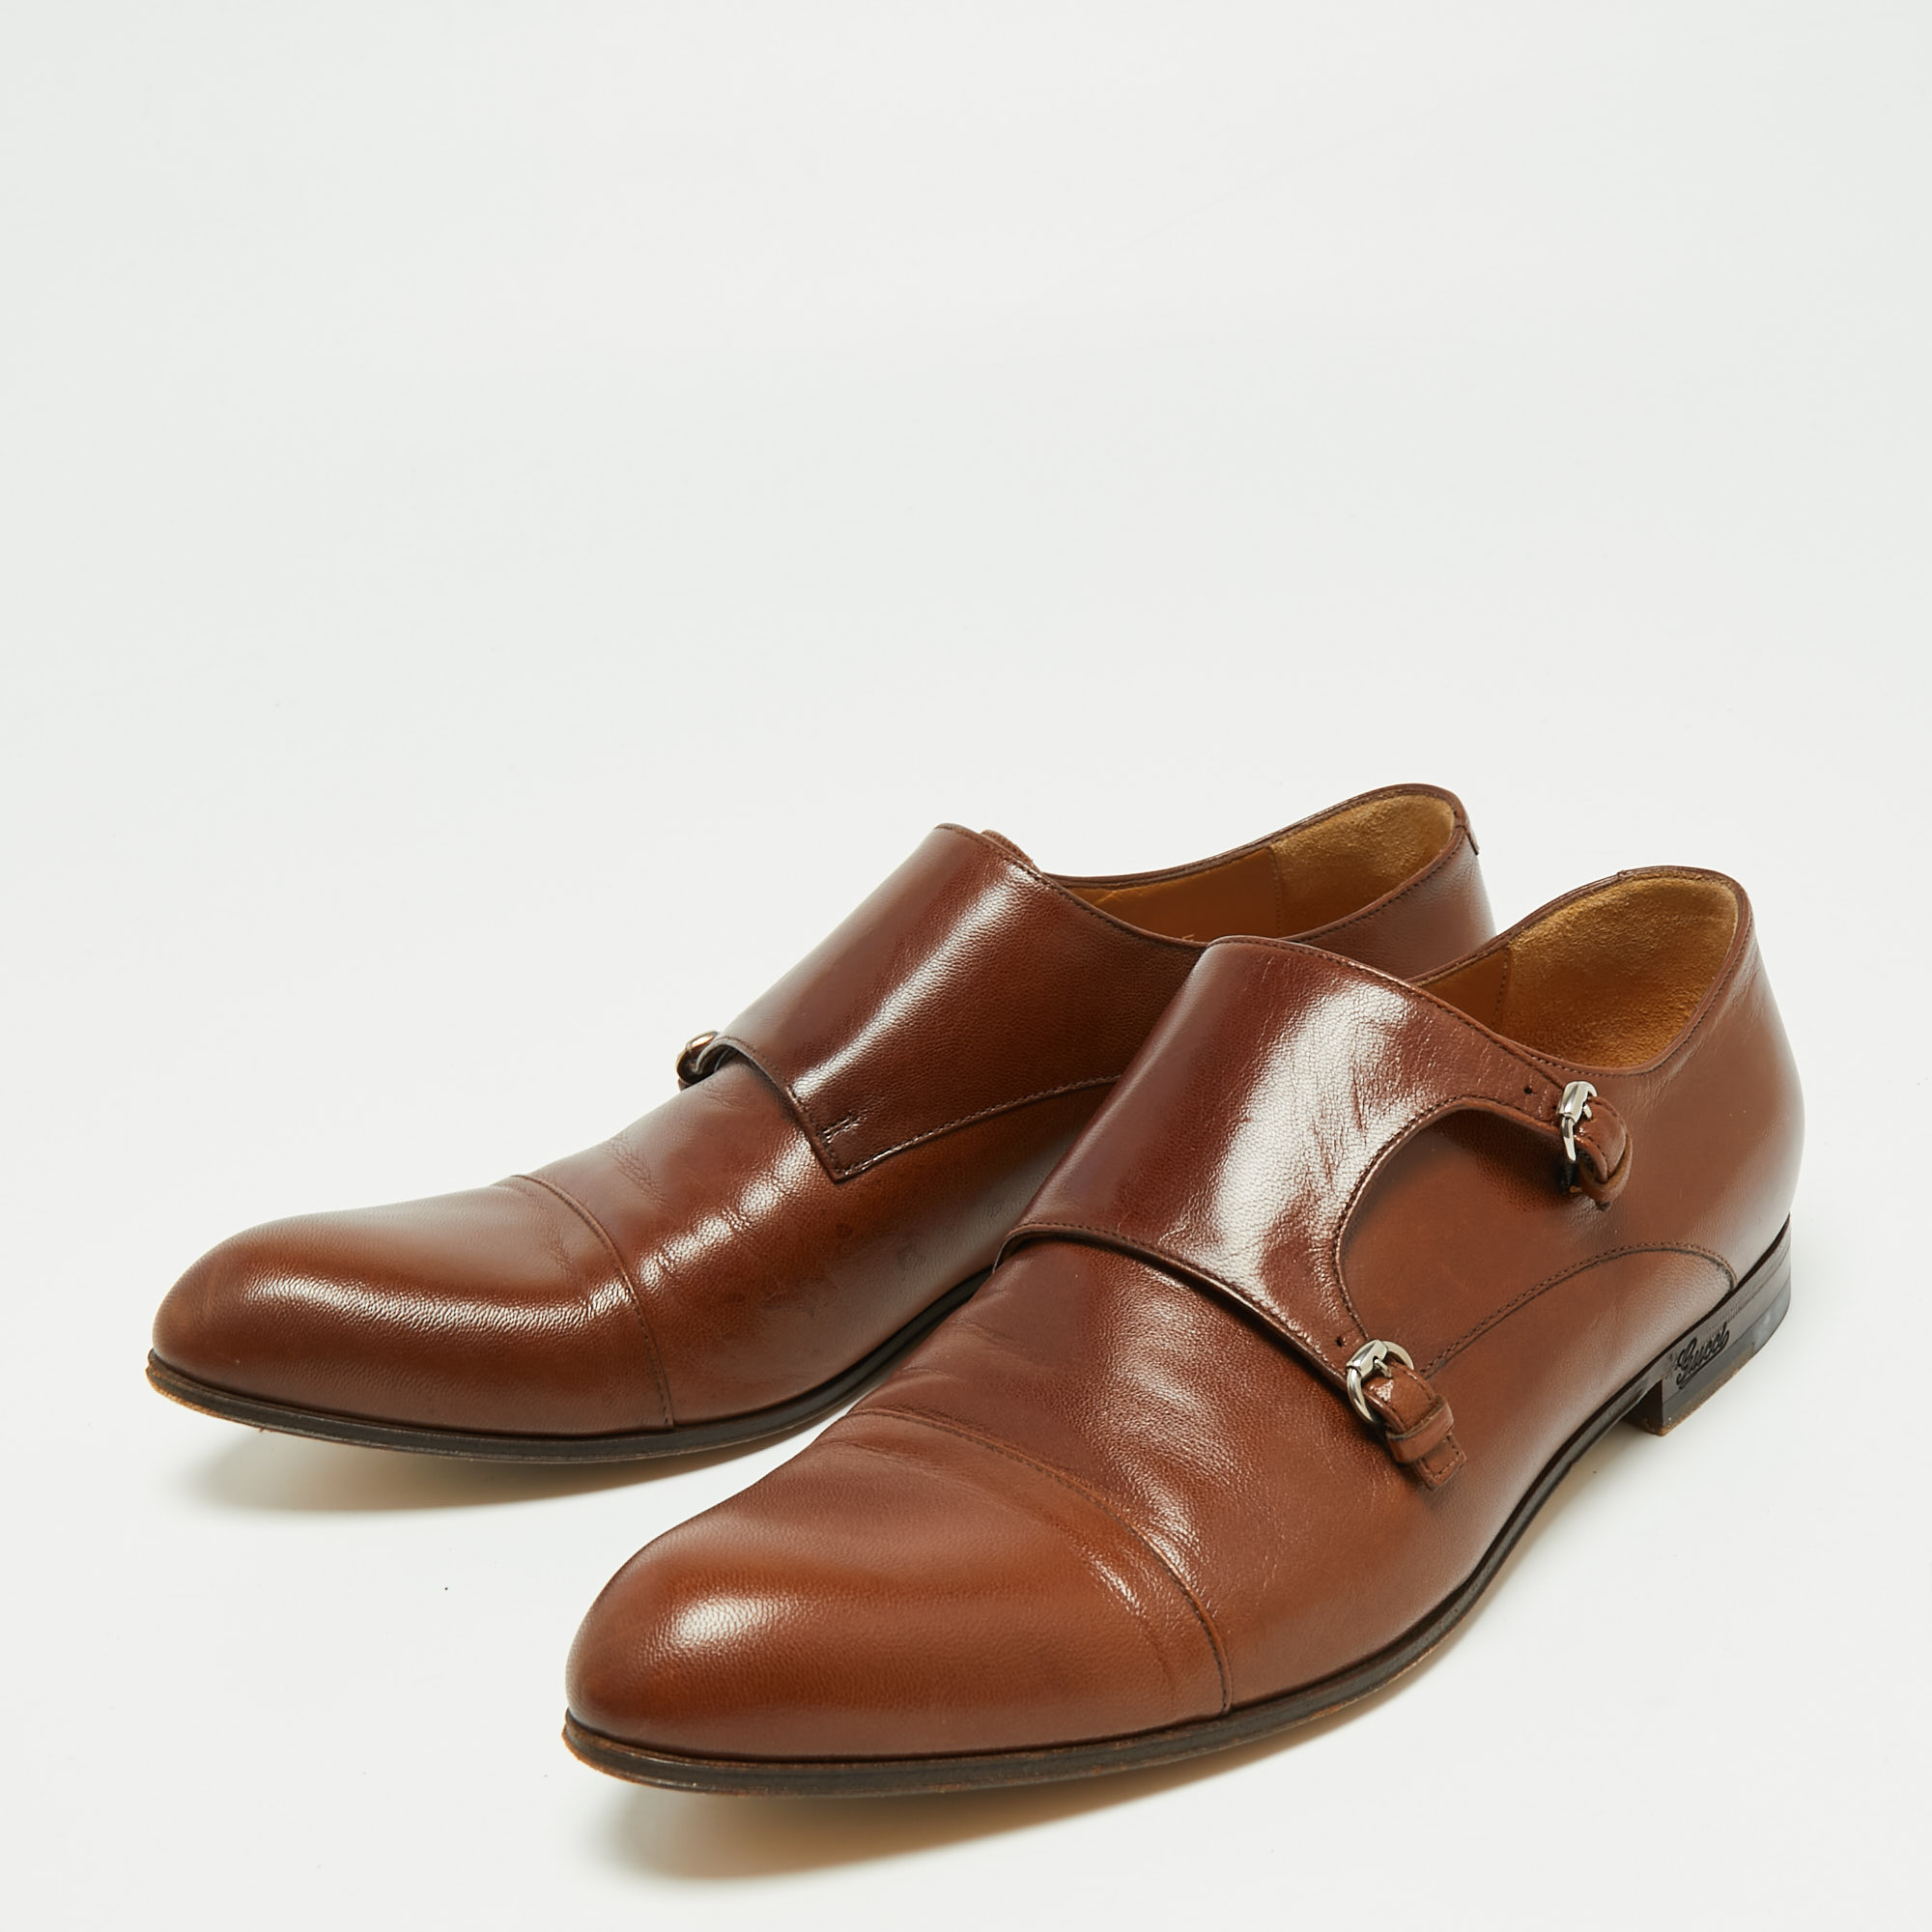 

Gucci Brown Leather Double Buckle Monk Strap Oxfords Size